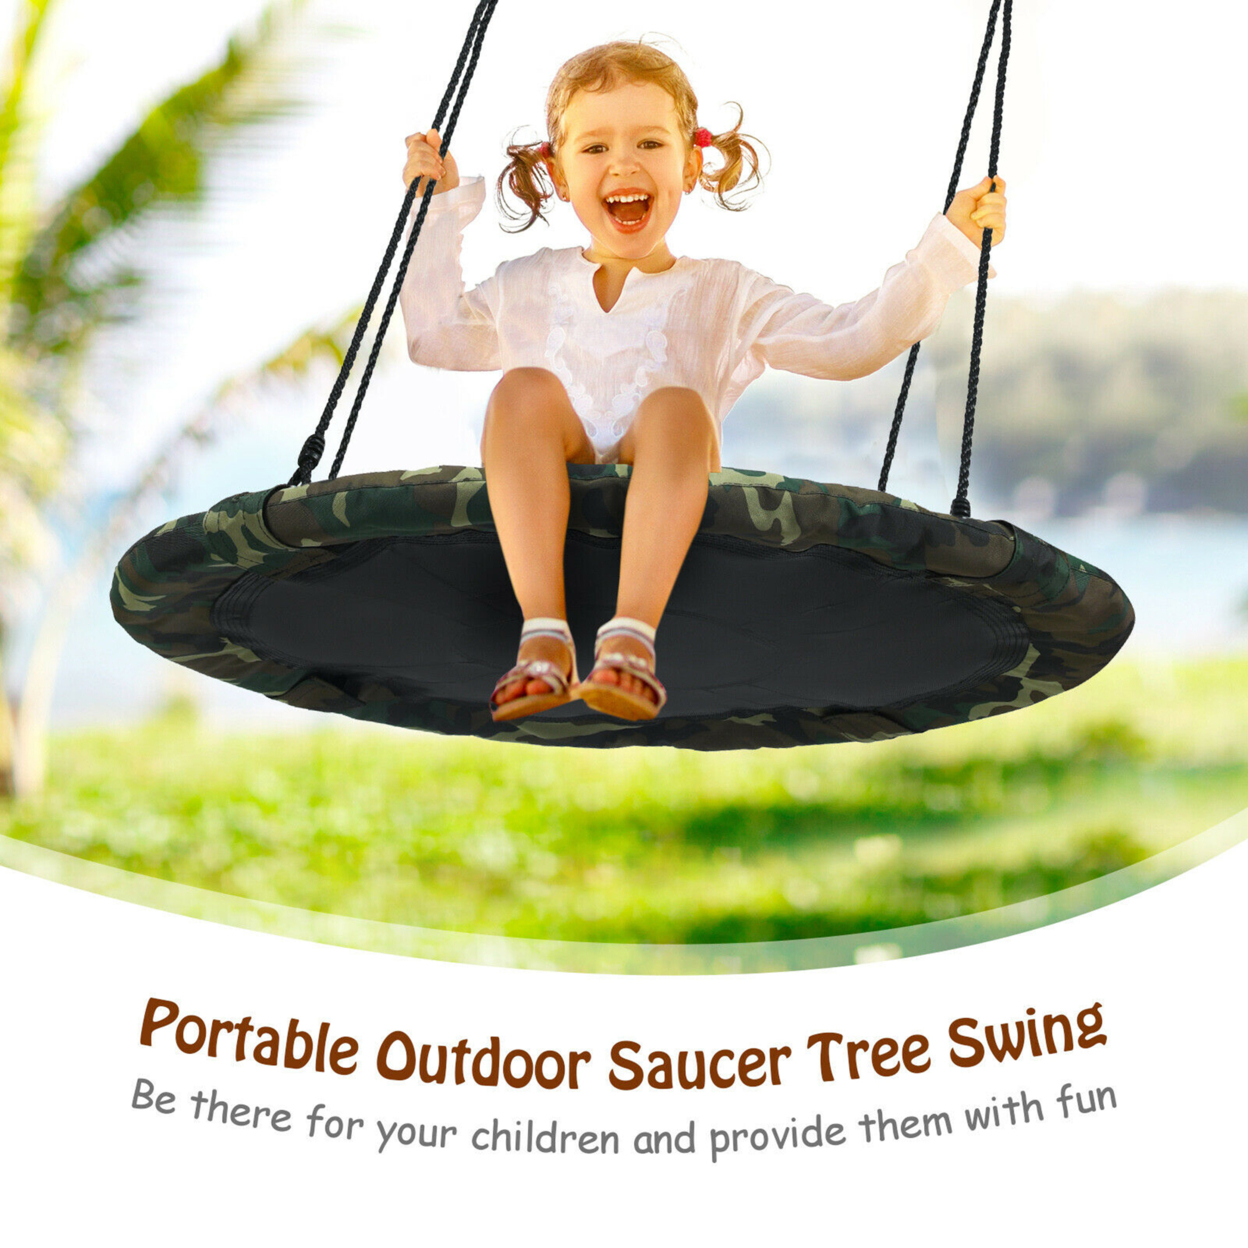 40'' Flying Saucer Tree Swing Outdoor Play Set W/ Adjustable Ropes - Blue + Orange + Green